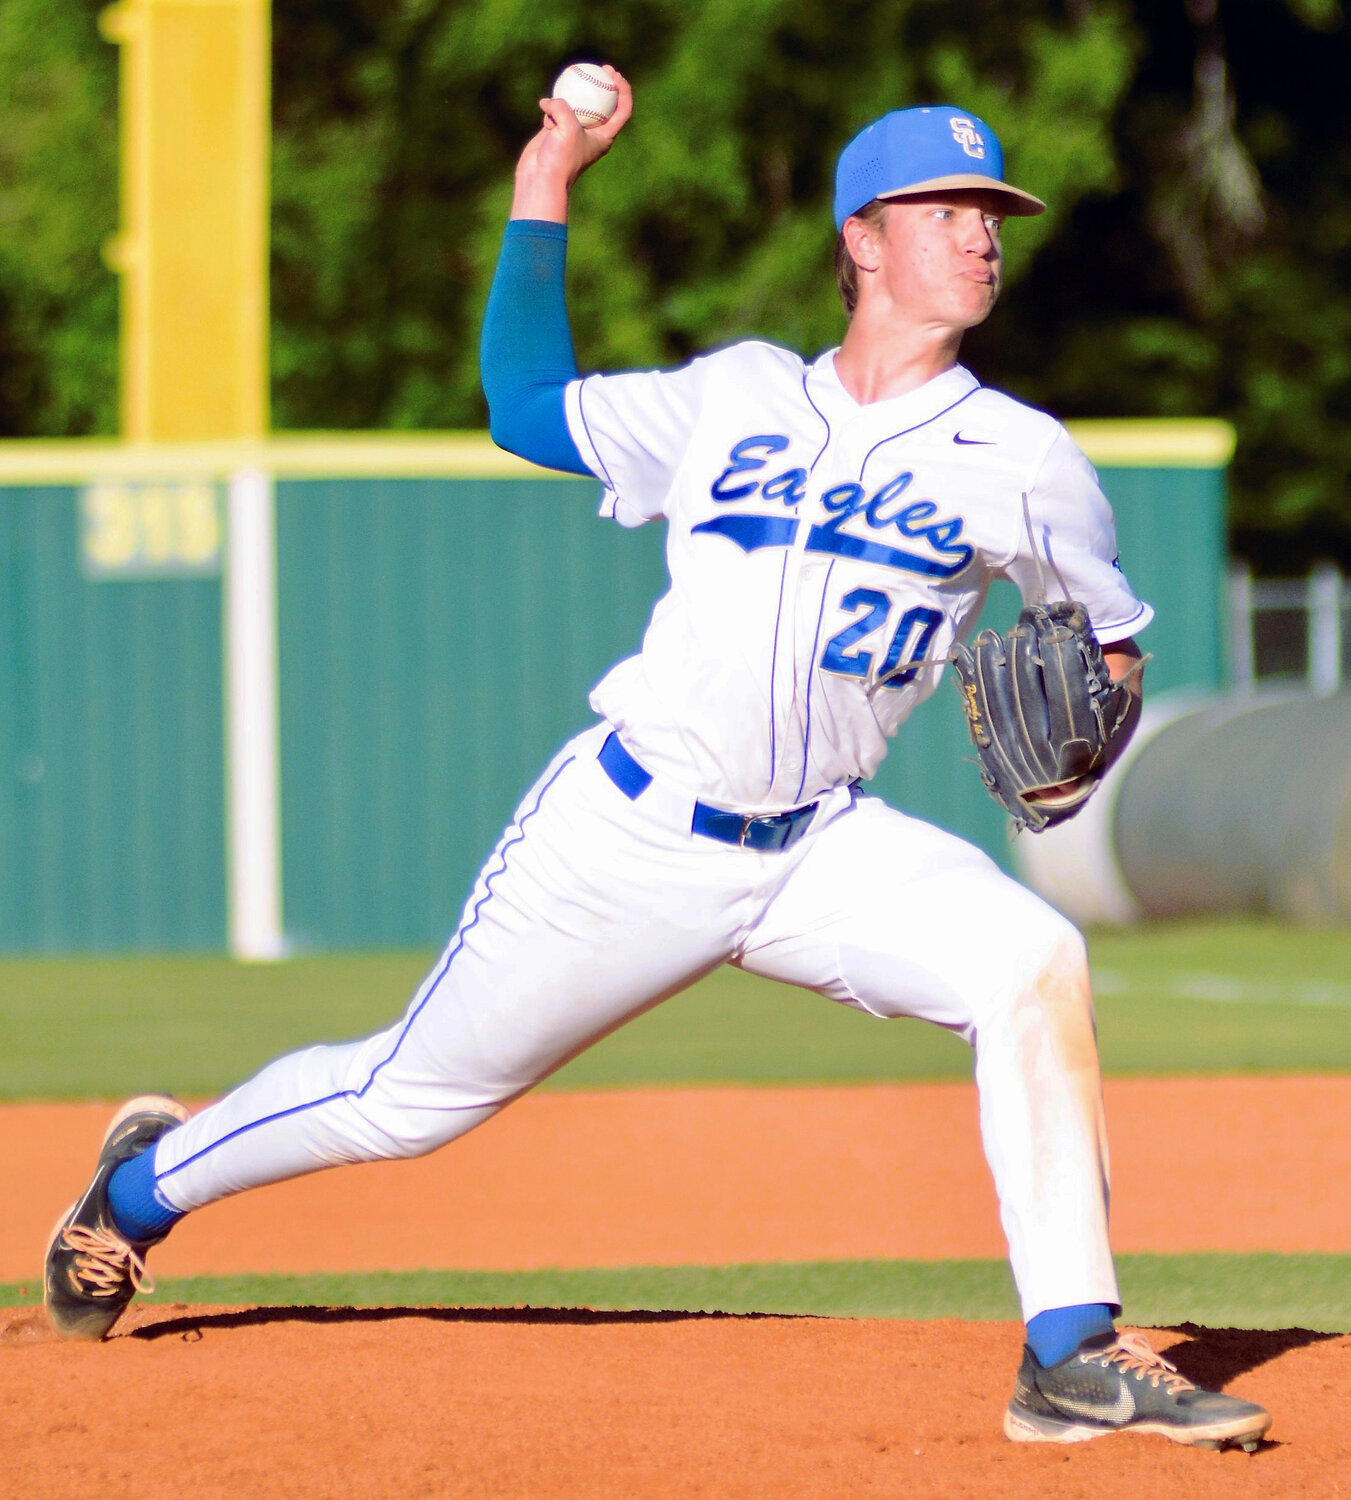 Carston Williams got the win on the mound in a relief appearance against Warren County on Wednesday evening. 